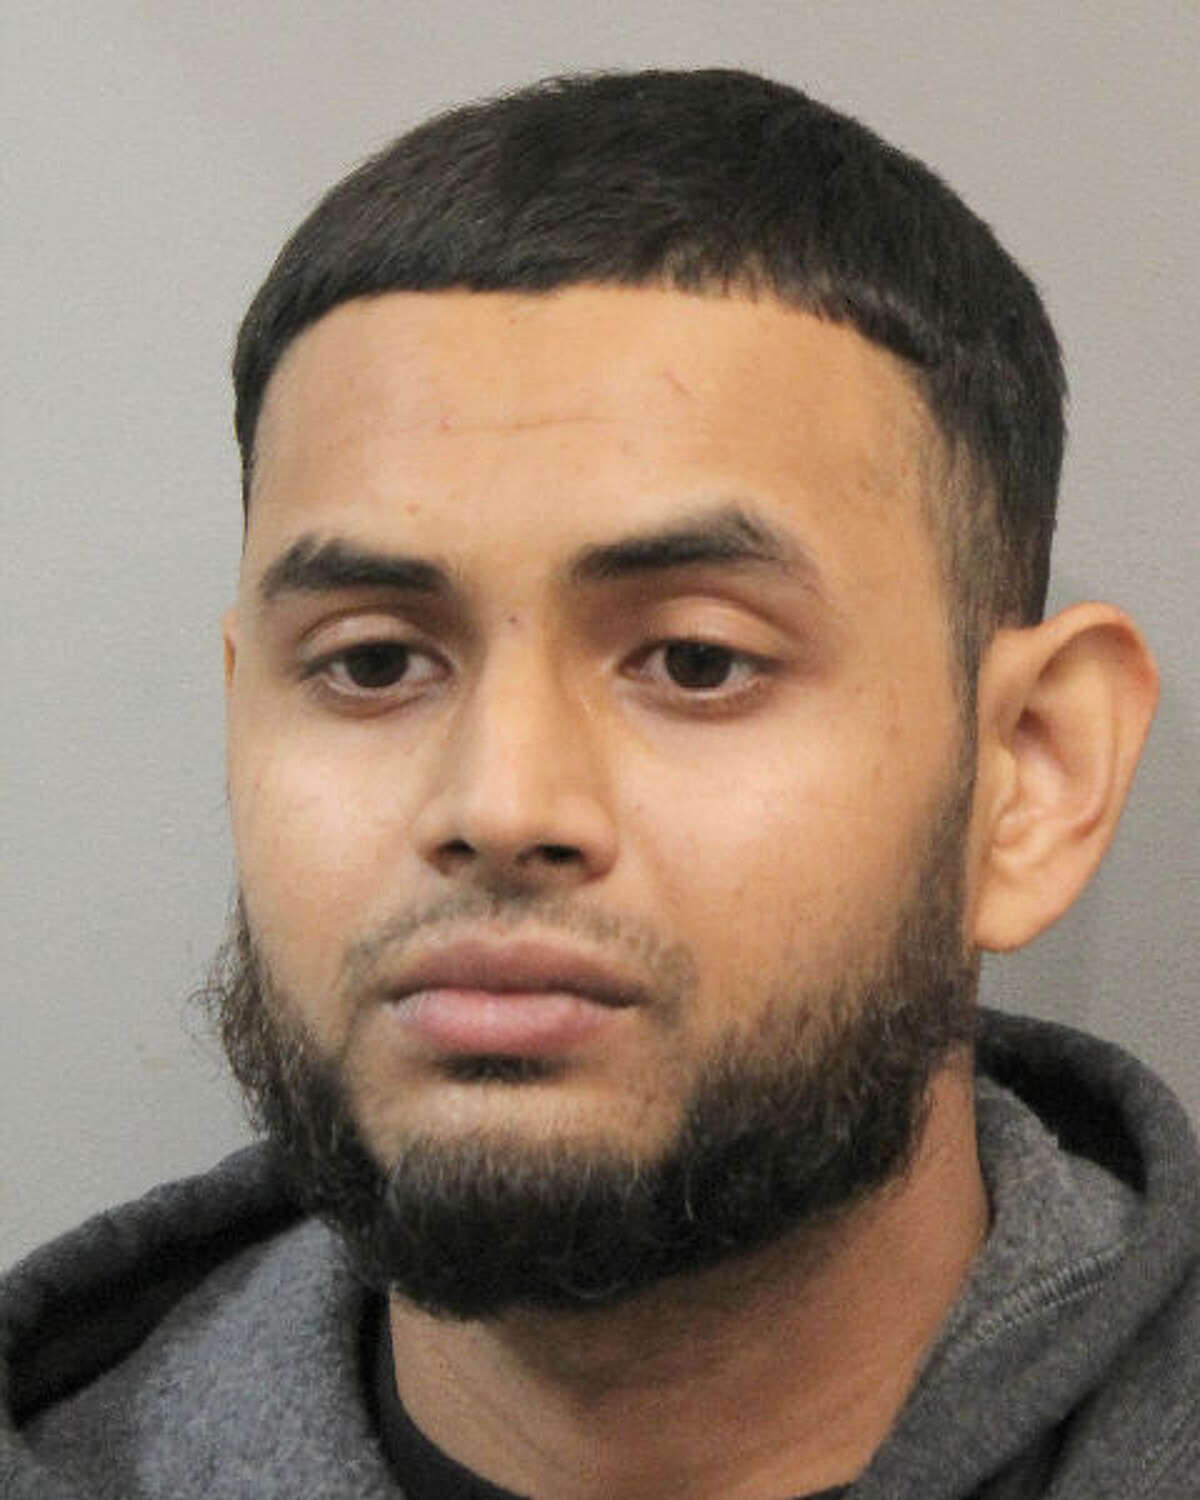 Farukur Siddique is charged with burglary in Harris County court alongside two other apparent bounty hunters.